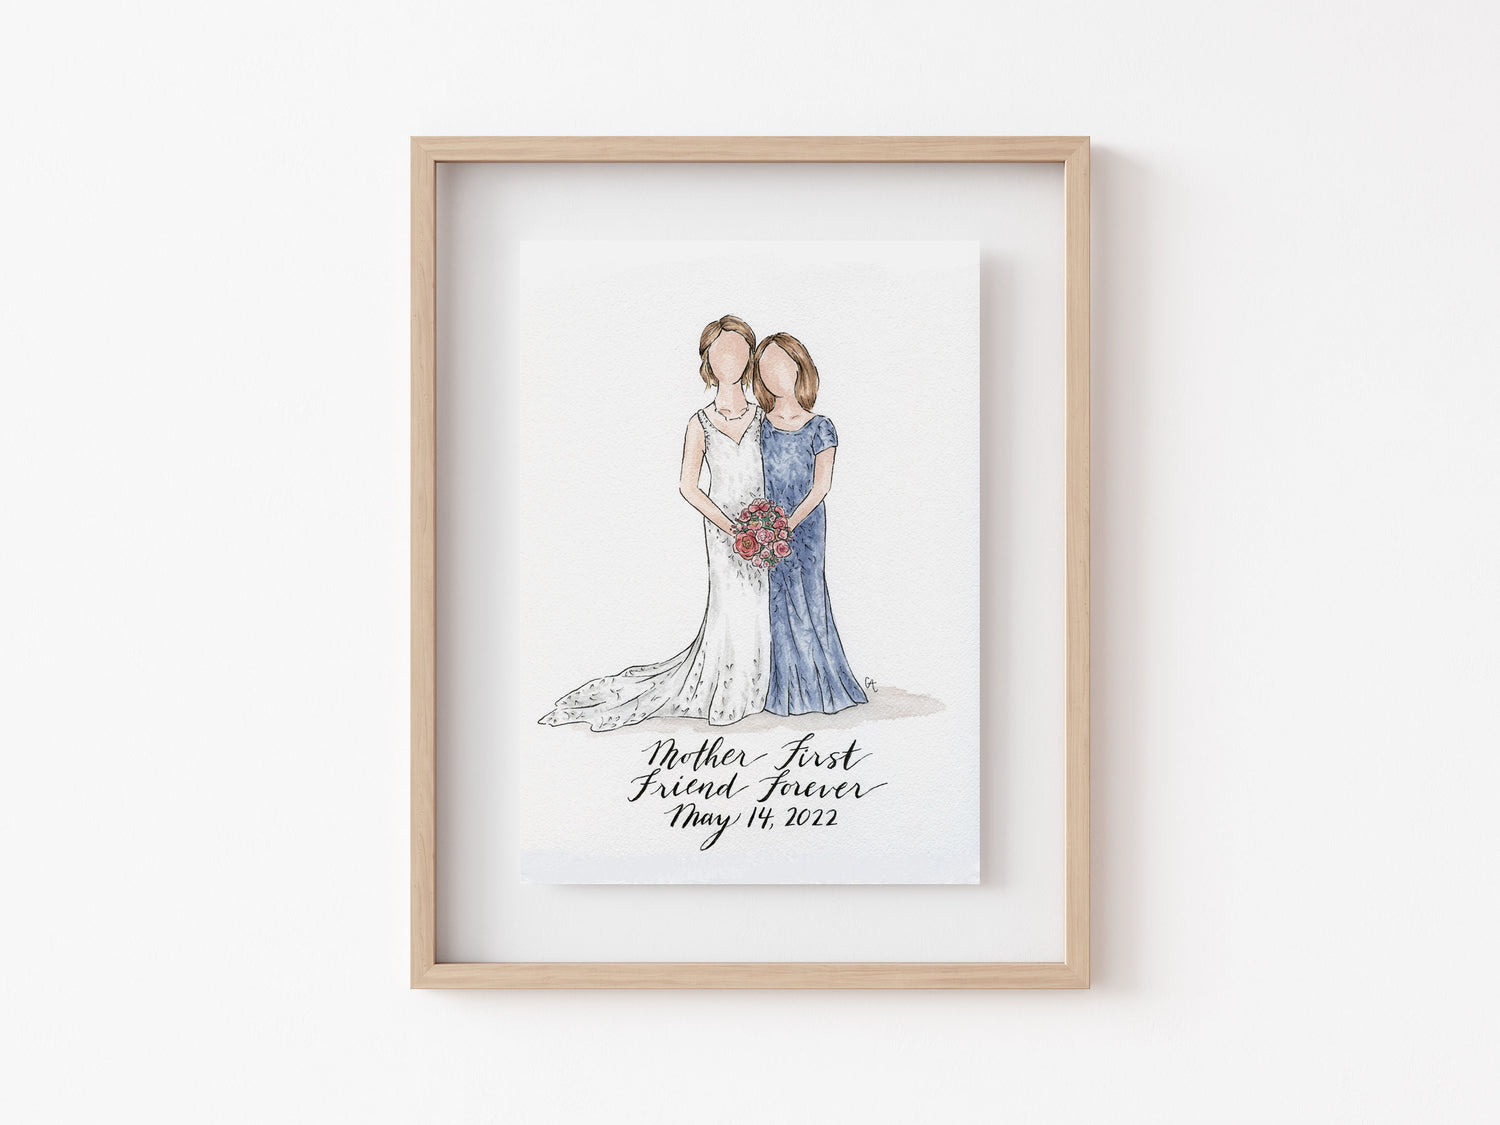 Wedding portrait of bride and mother of the bride, gift for mom on daughter's wedding day, mother and friend, painted in vignette style with wedding dress and bouquet | Custom Watercolor Wedding Invitations, Dallas, Texas | By Caroline Ann